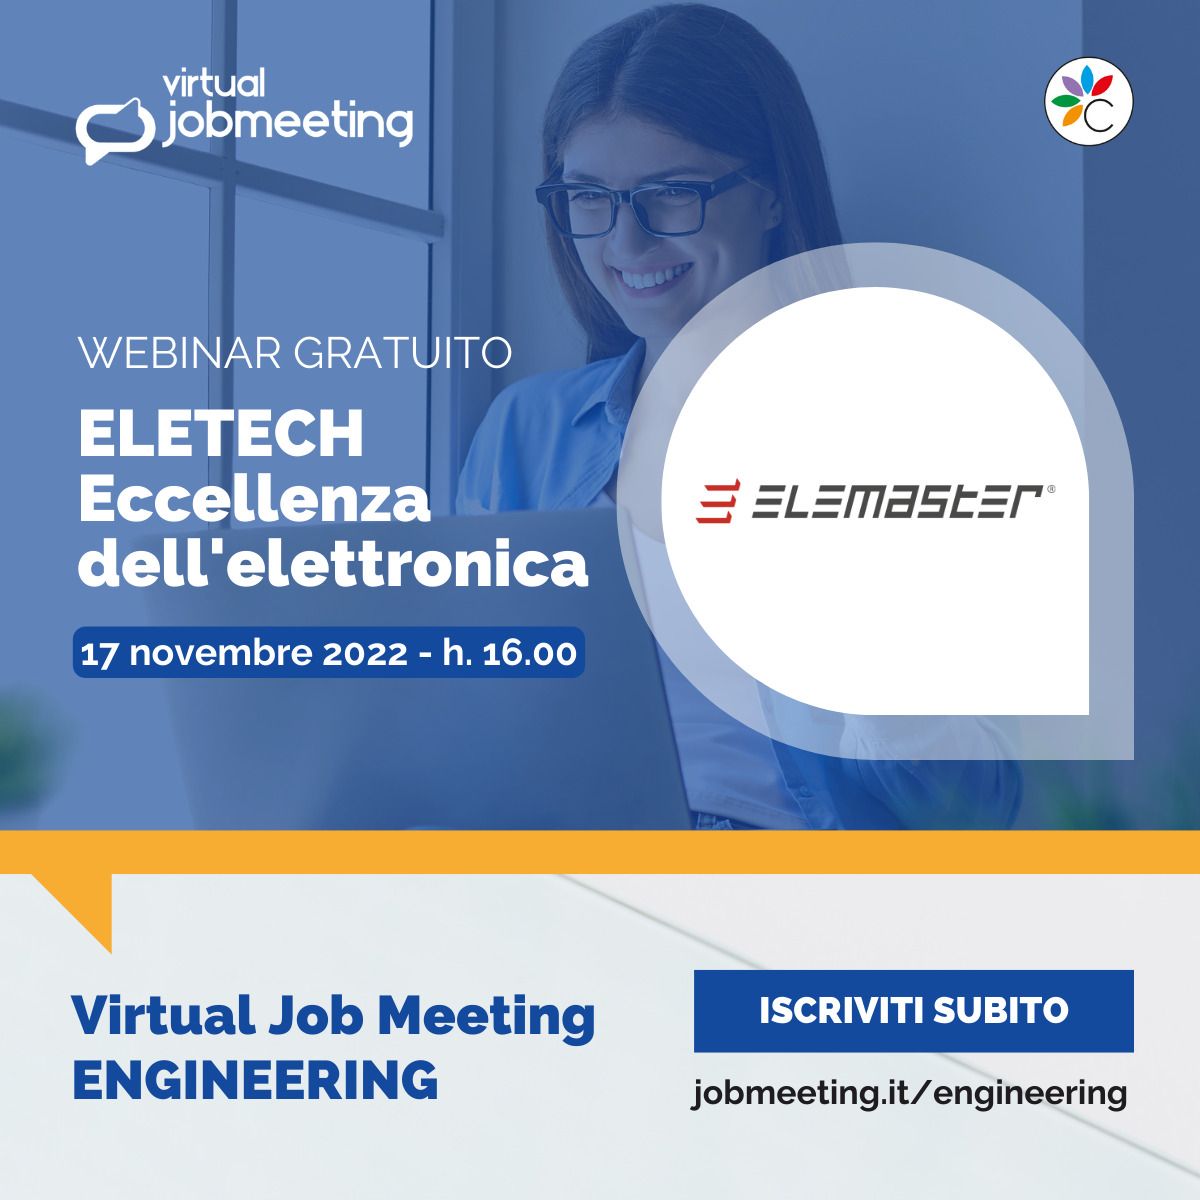 THE VIRTUAL JOB MEETING ENGINEERING: WE ARE WAITING FOR YOU!